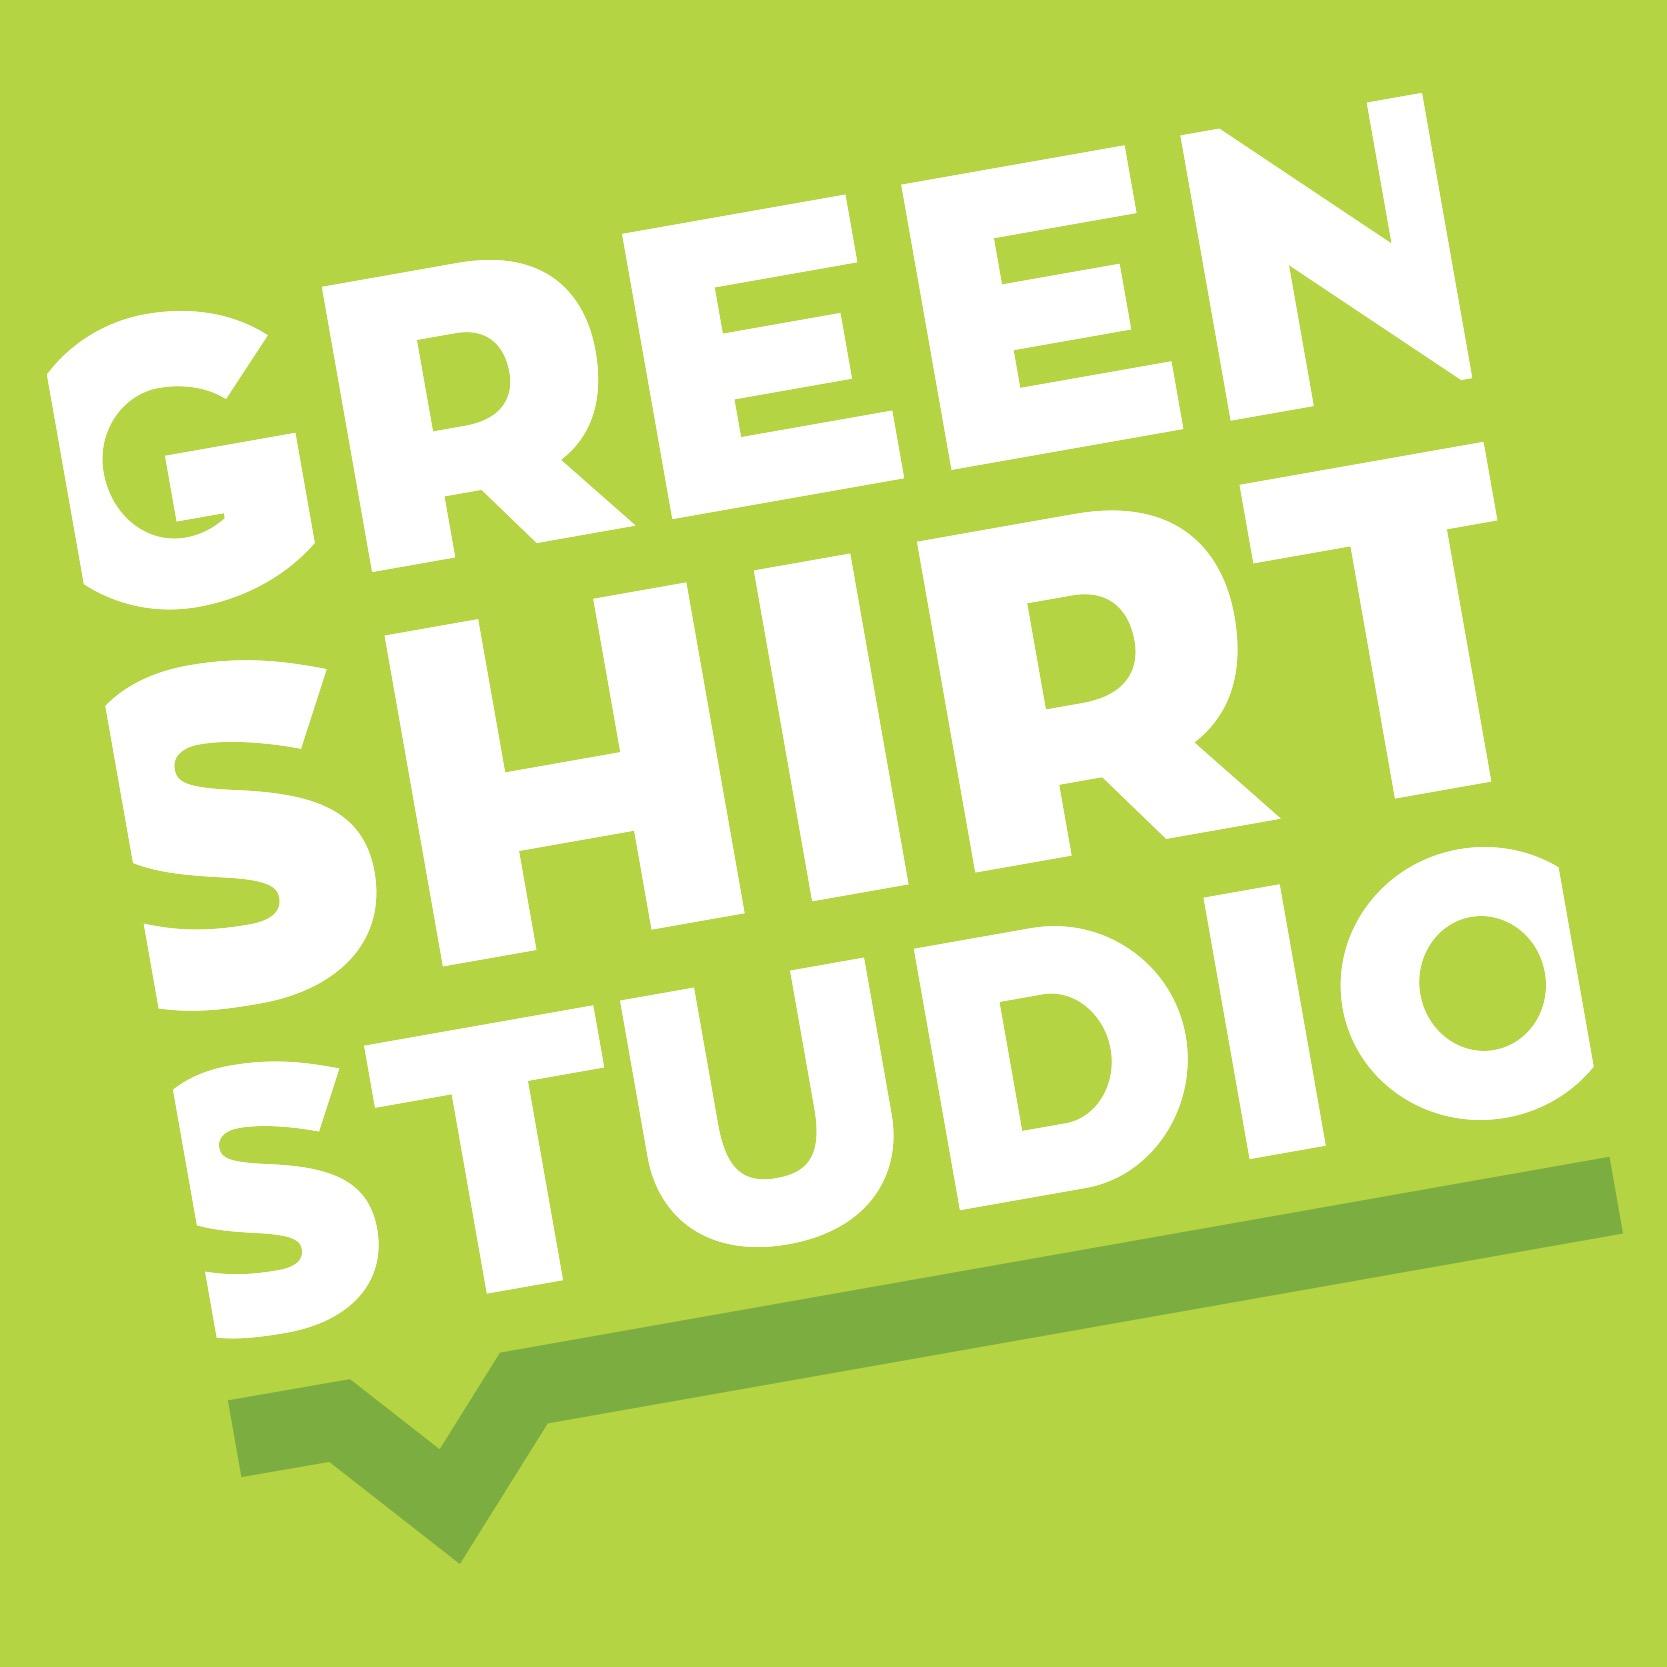 GREEN SHIRT STUDIO ANNOUNCES FREE FRIDAYS PROGRAMMING AND NEW YOGA CLASSES 1 Green Shirt Studio, an acting and performance training center located at 4407 N. Clark St., is thrilled to announce two new initiatives designed to open the school up to the public – free workshops every Friday, as well as the addition of four on-going yoga classes every week. Both new programs begin Aug. 1.